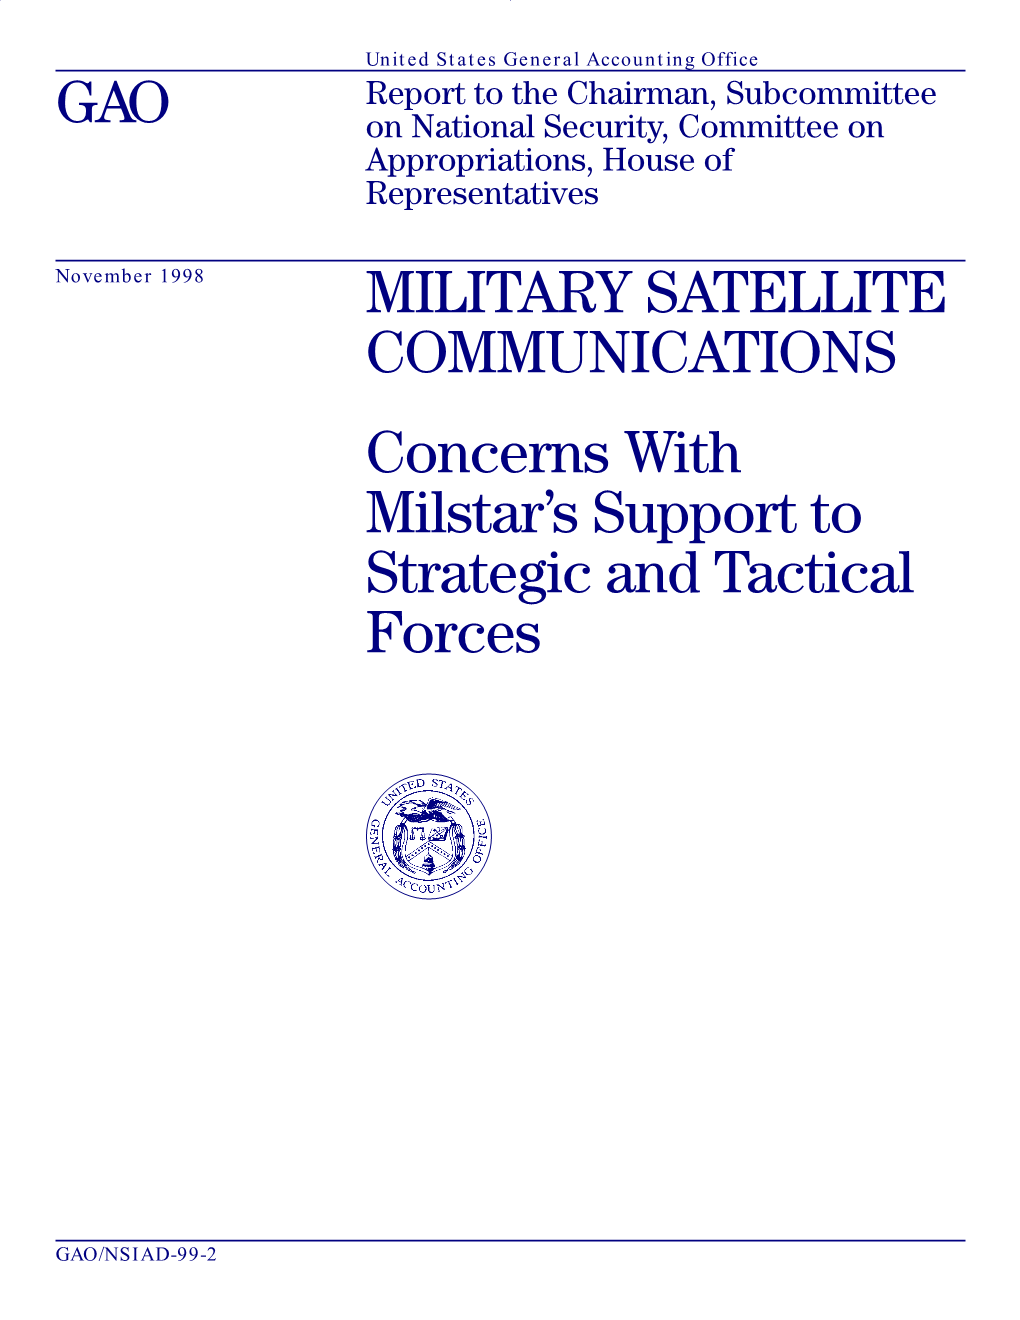 Concerns with Milstar's Support to Strategic and Tactical Forces